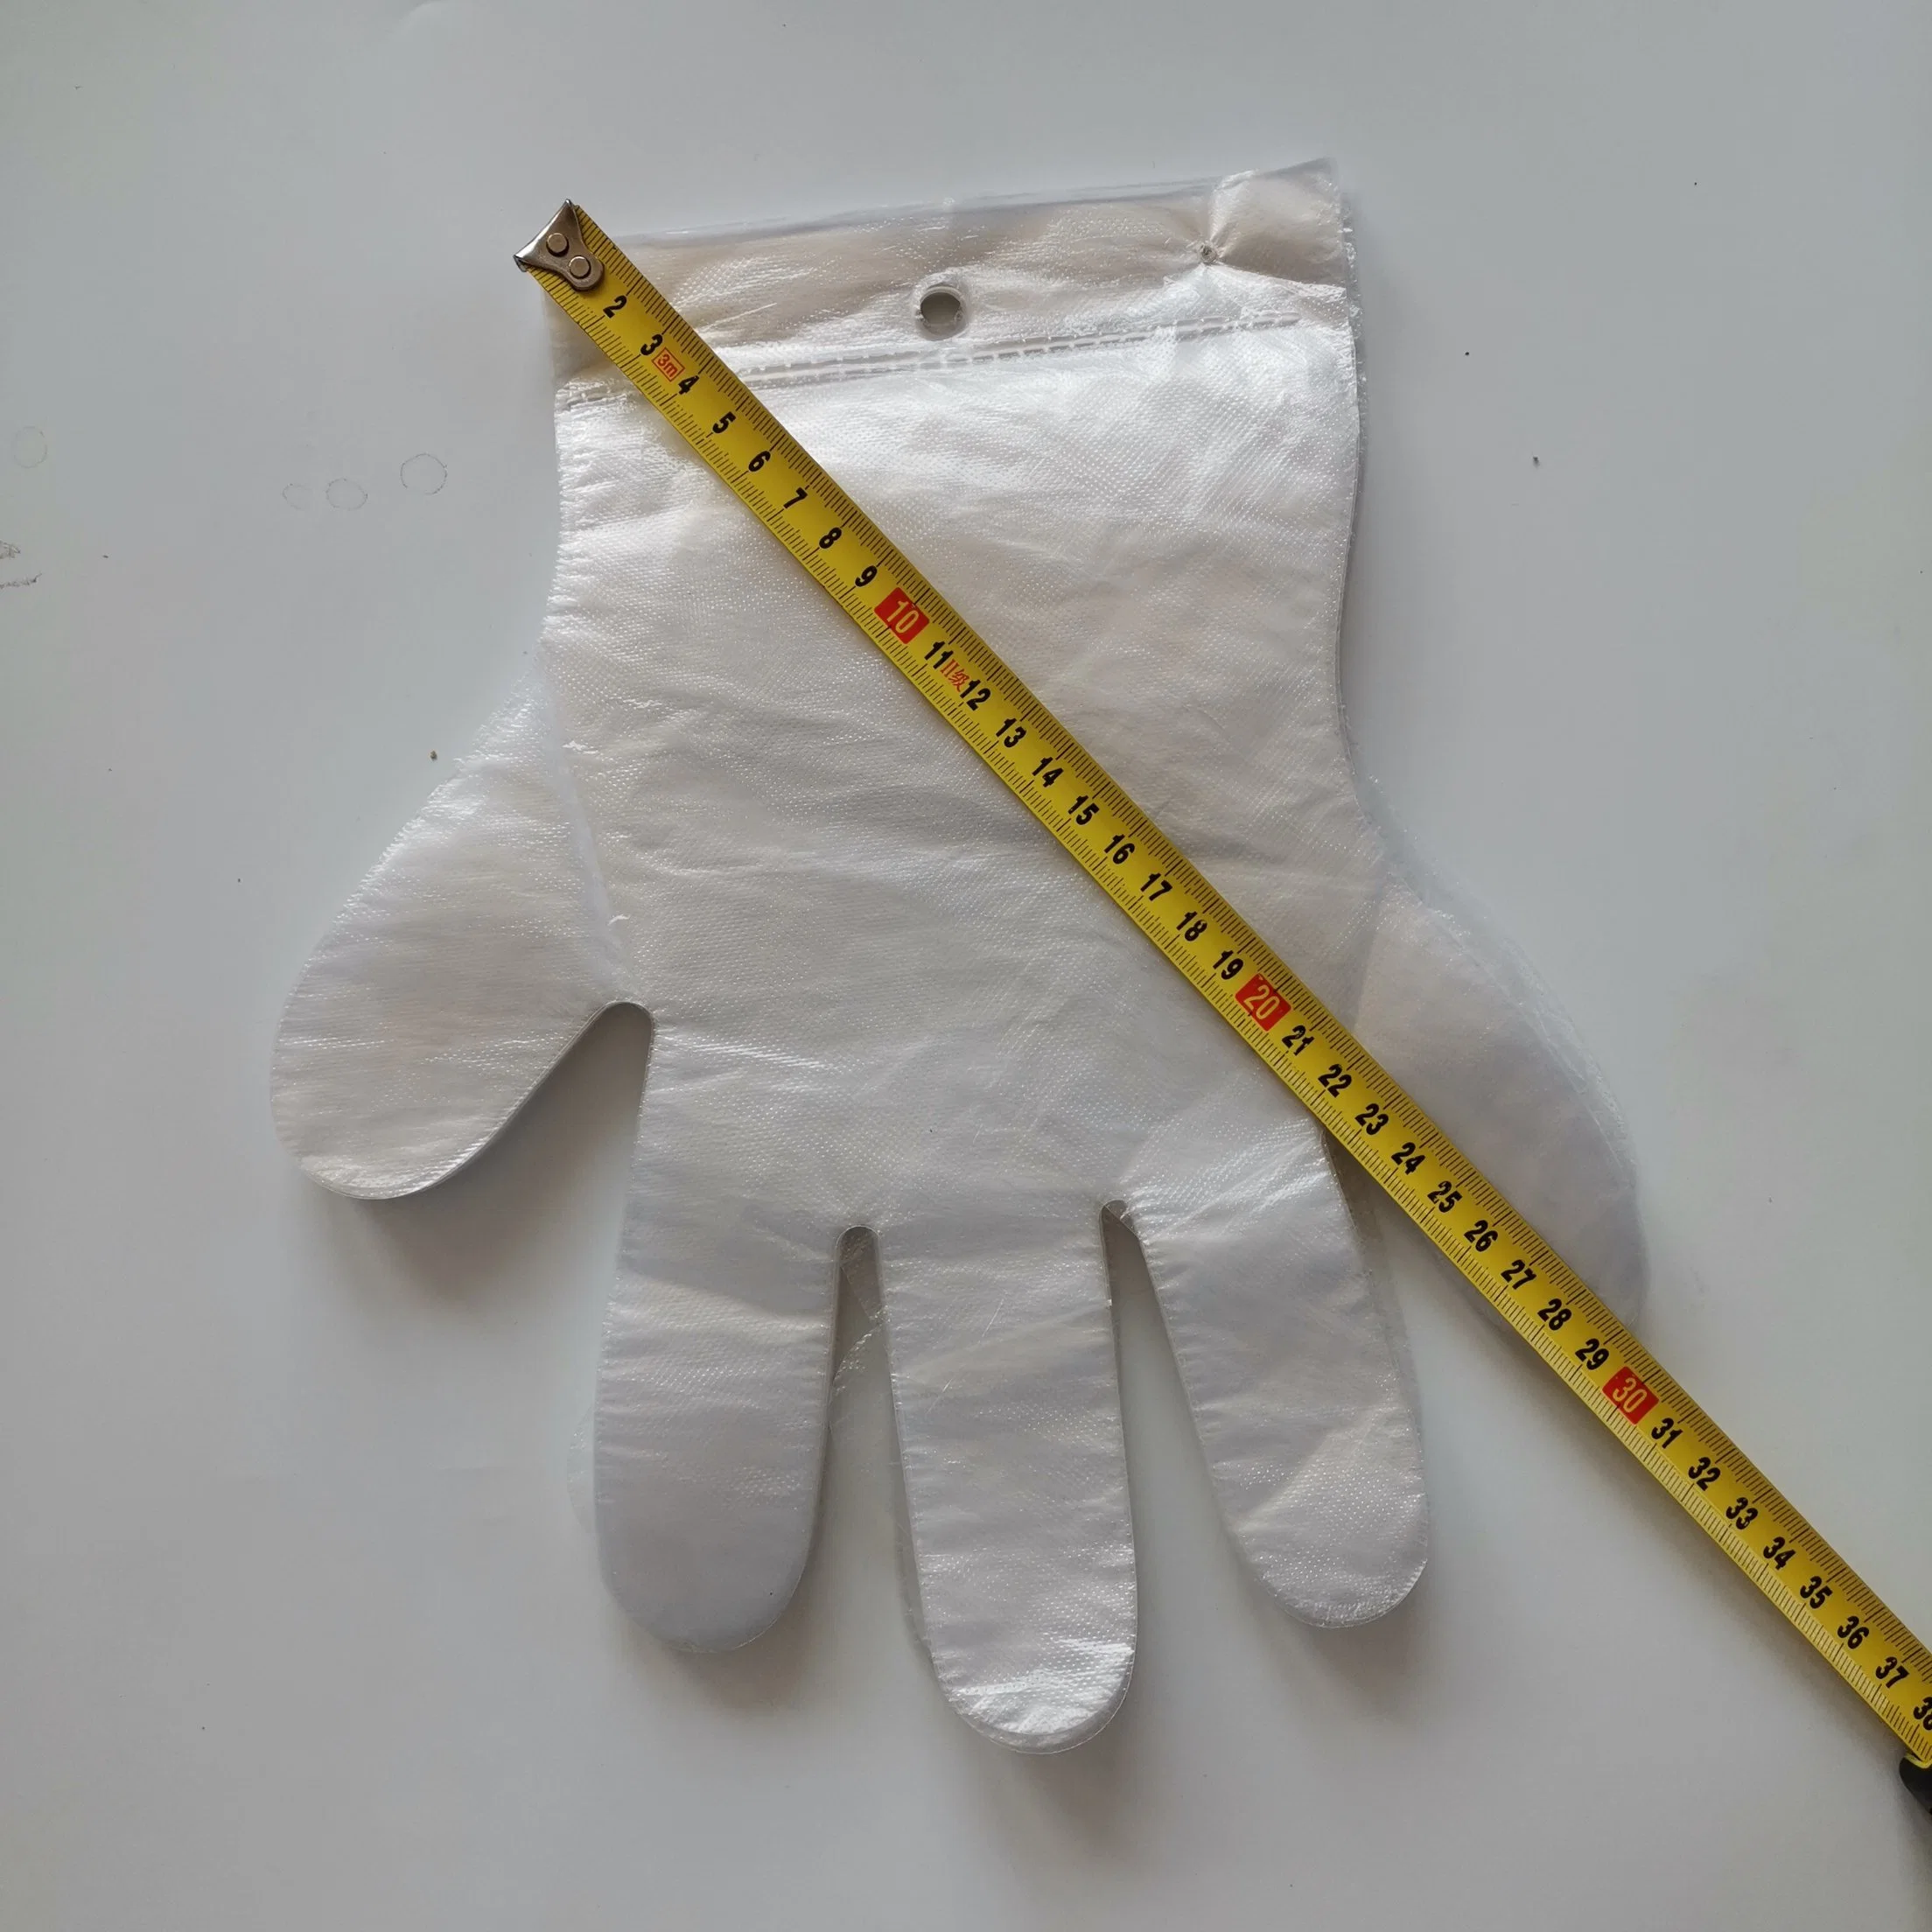 0.7g Gloves Hot Sale Standard Size Disposable HDPE Plastic White Color Cleaning Gloves with Break Point and Hole